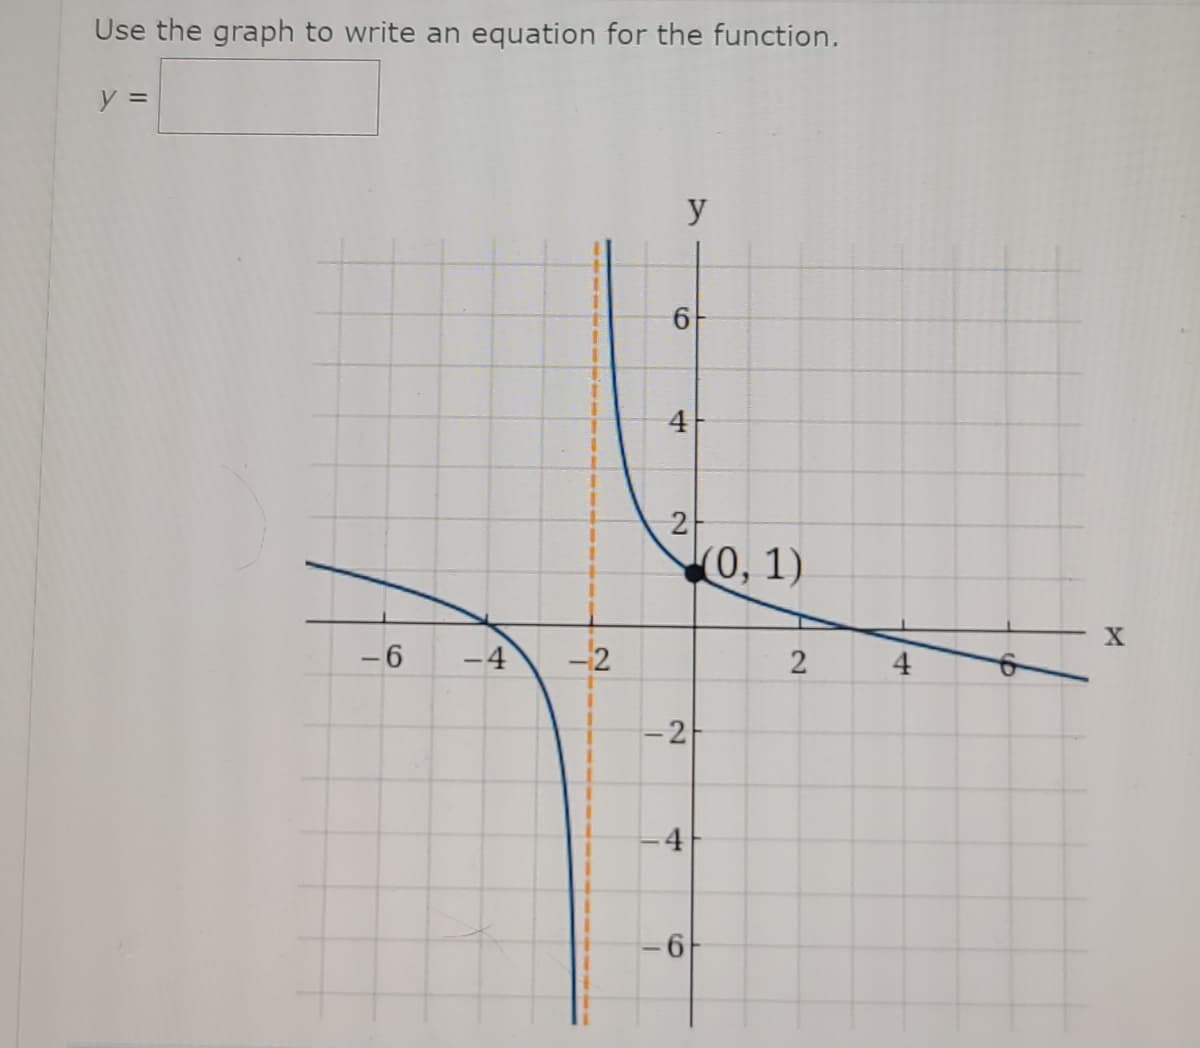 Use the graph to write an equation for the function.
y =
y
4
(0, 1)
- 6
-4
-2
2
4
6,
2.
2)
